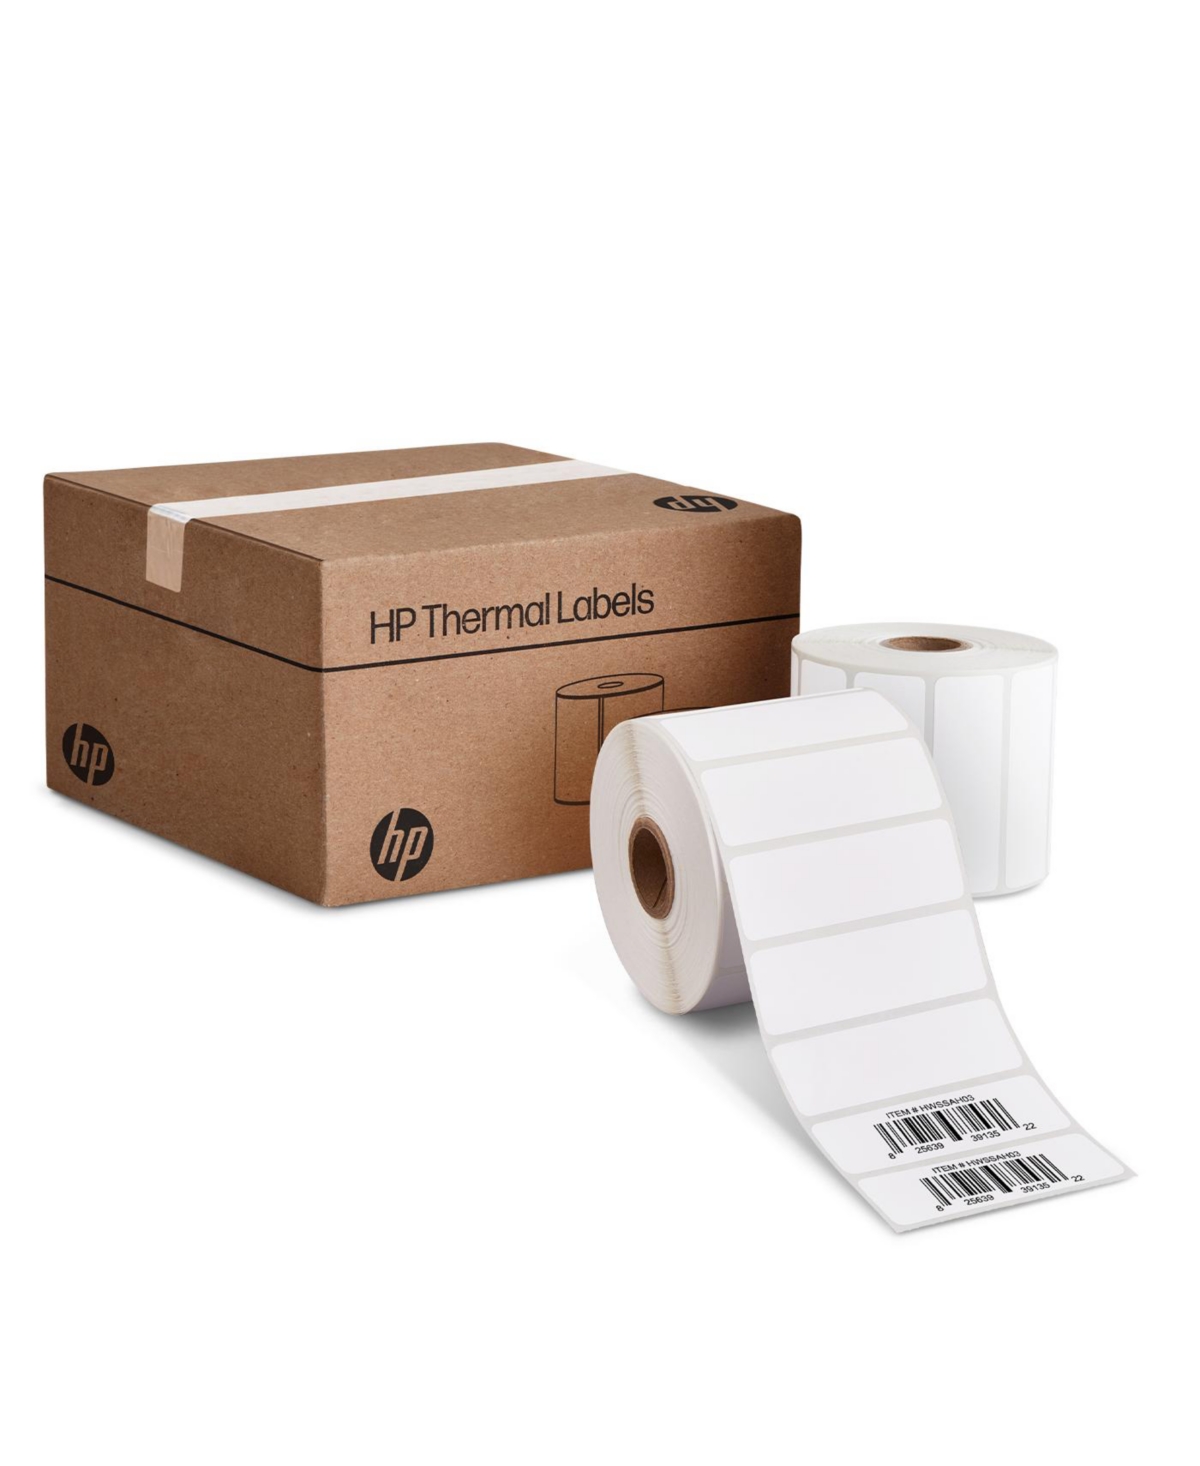 3x1" Direct Thermal Shipping Labels, 2 Rolls (2750 Labels) - Open White